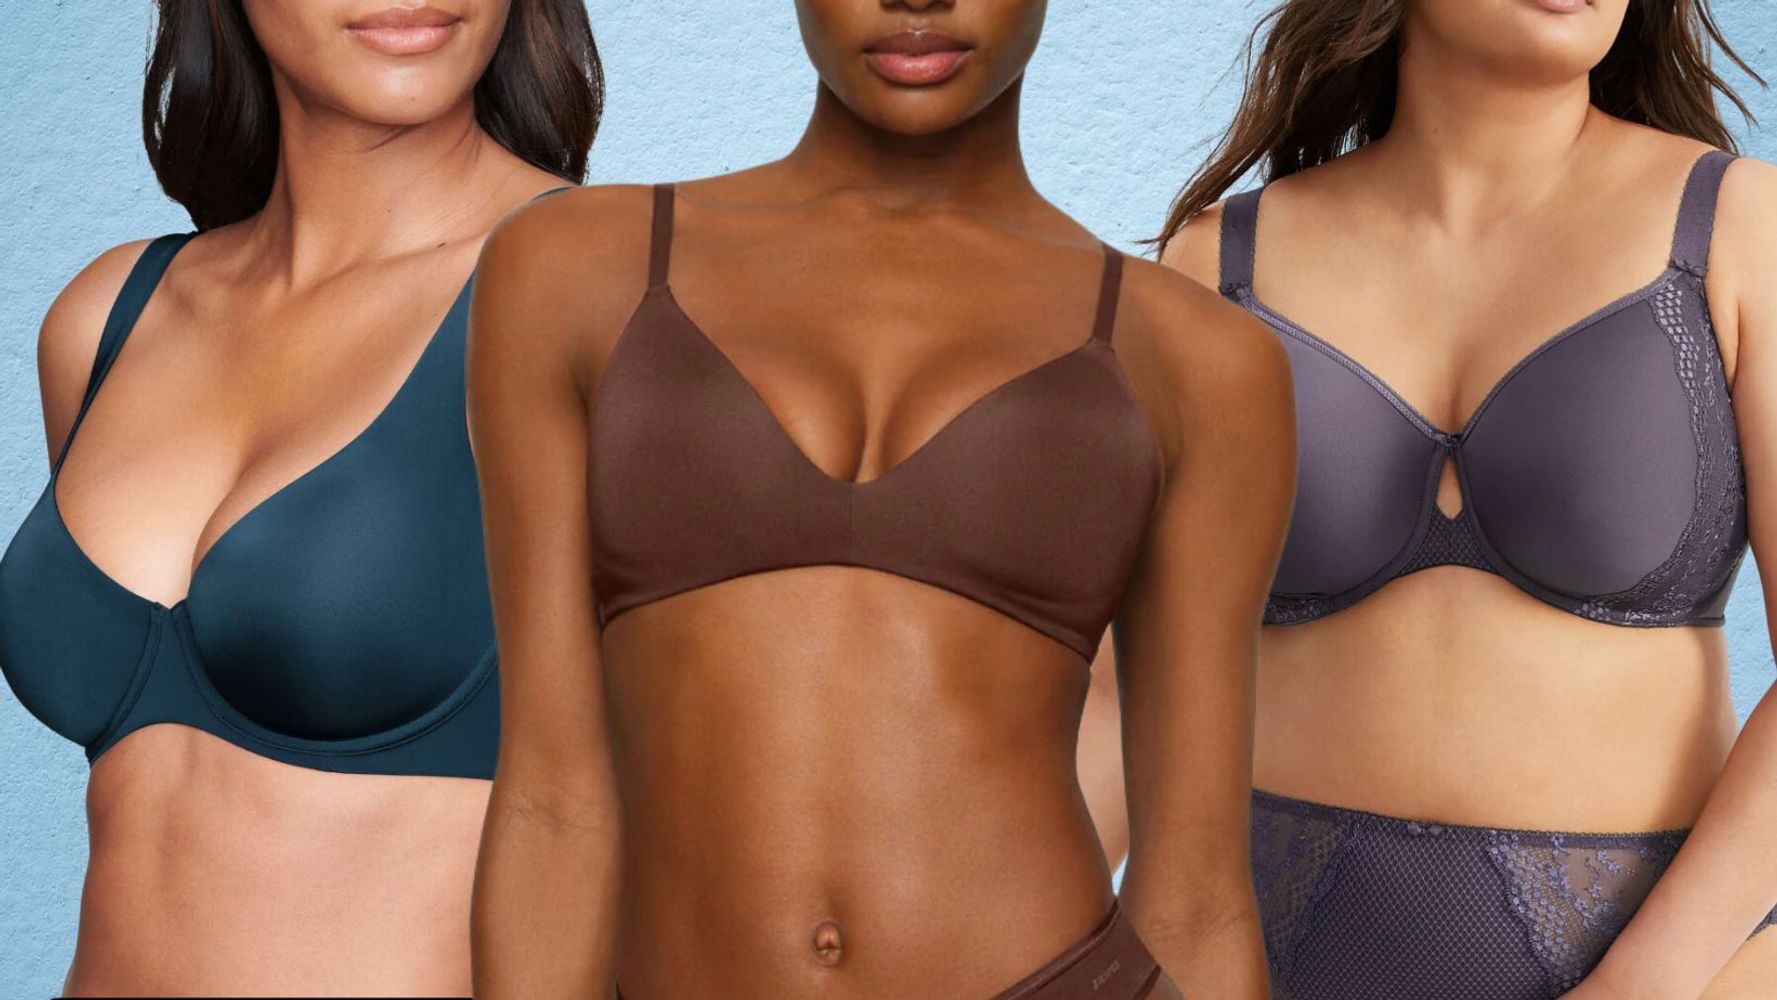 CUUP Sale: Save 25% on Comfortable, Celeb-Loved Bras Right Now